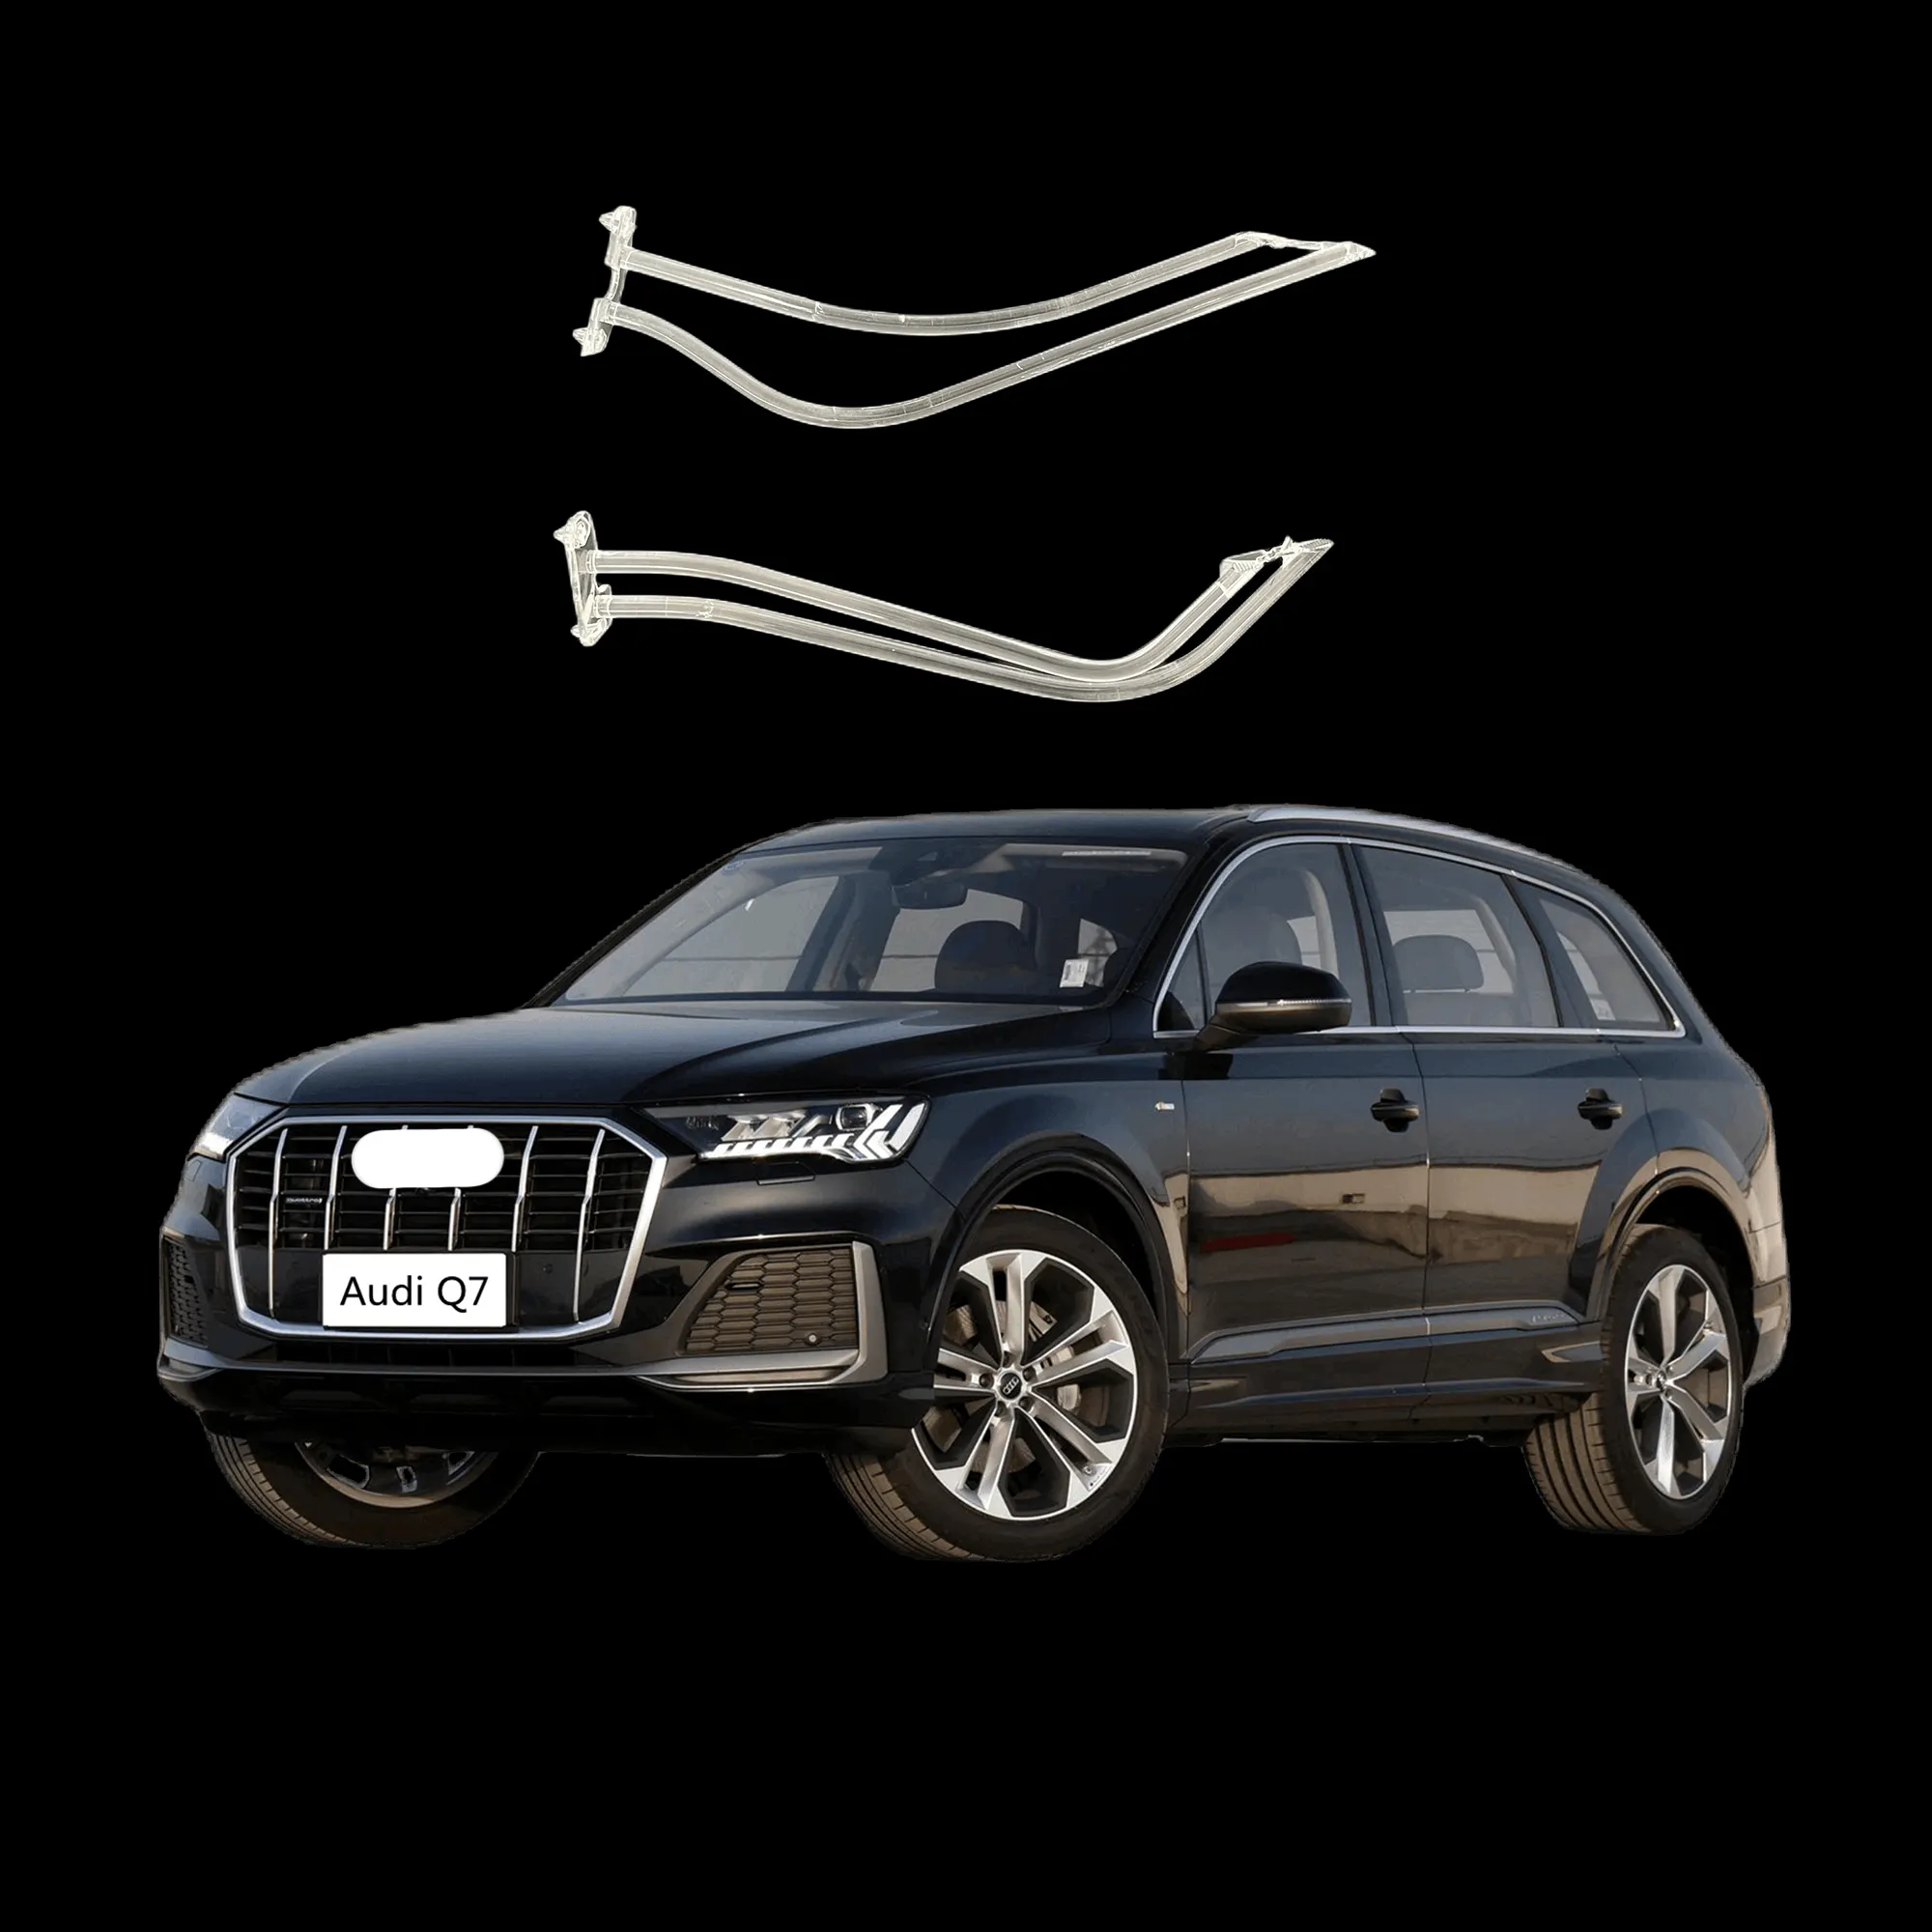 LED Daytime Running Exterior Decoration Lights Suitable for Audi Q7 headlight series light guide bar Auto Atmospere Lamp Car